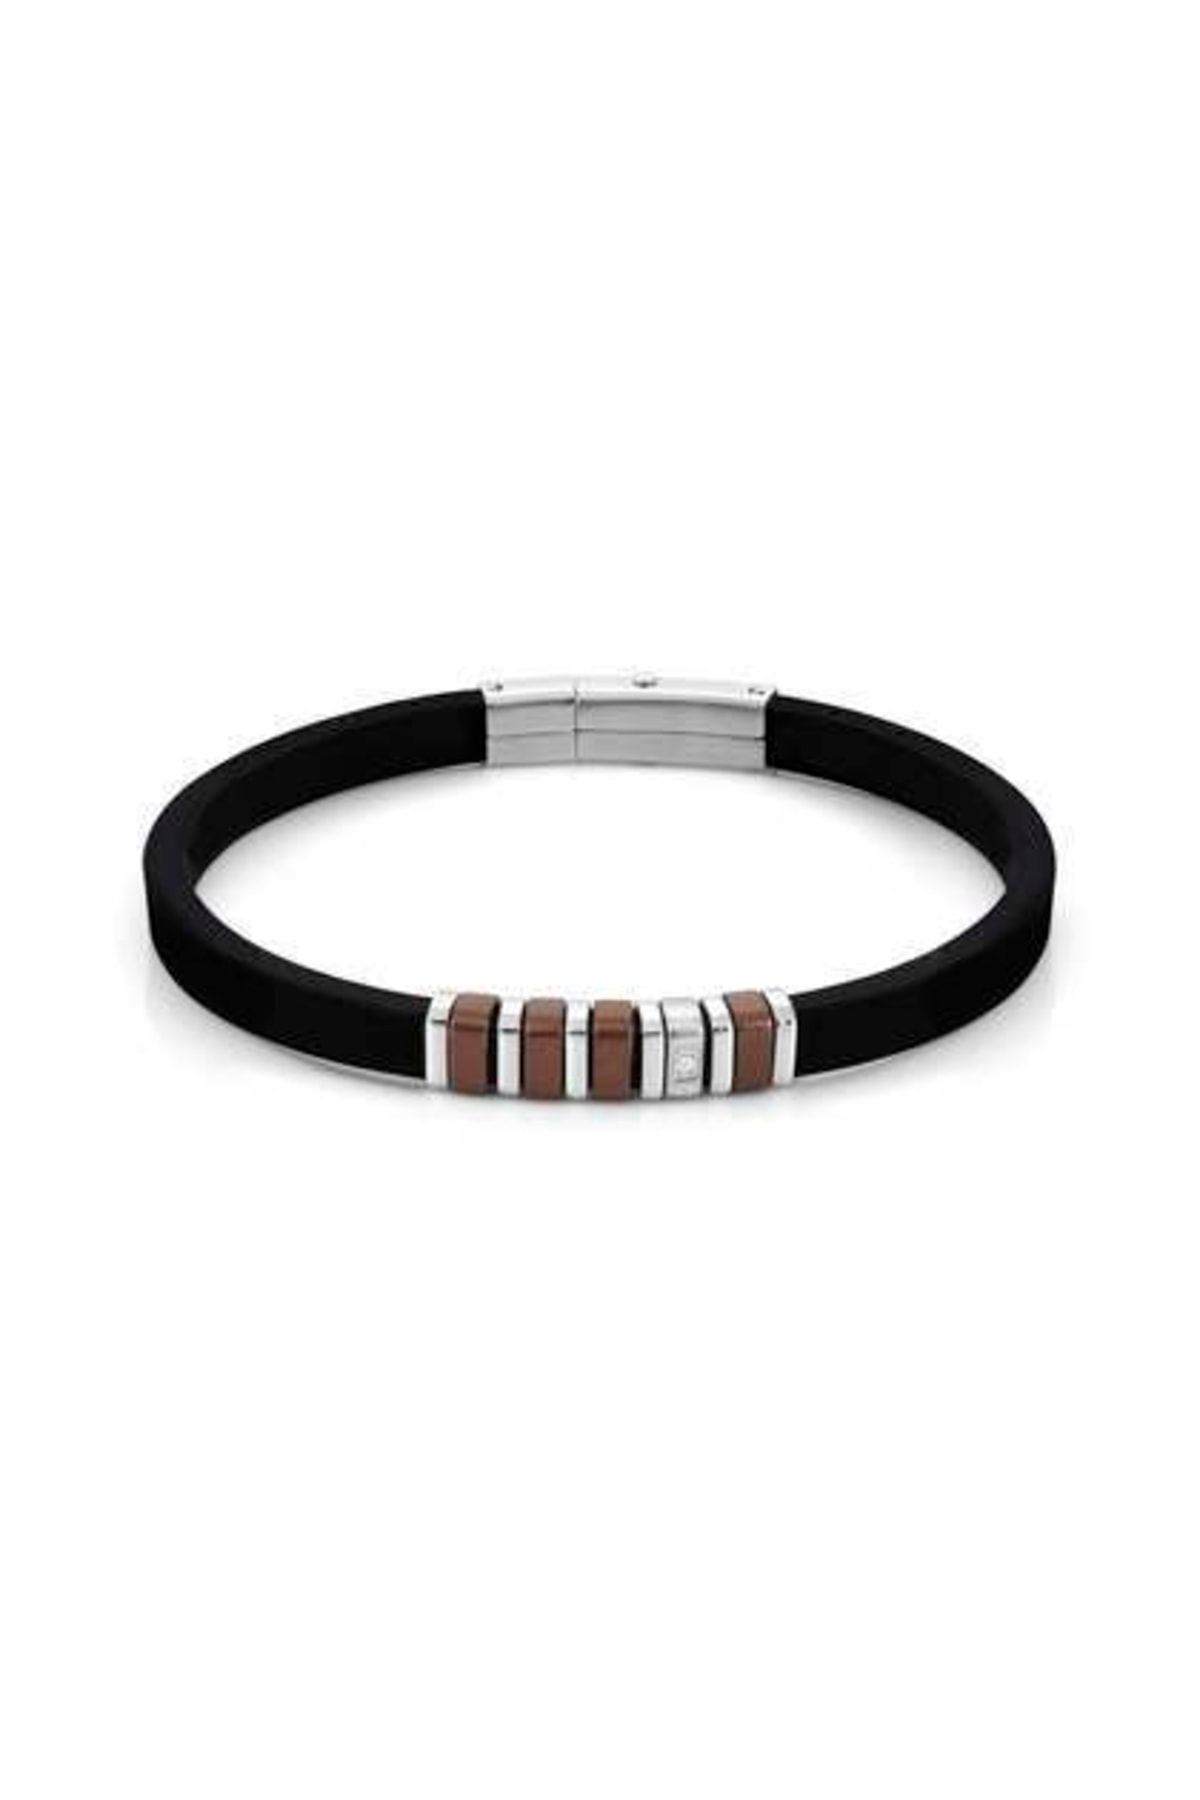 NOMİNATİON Cıty Bracelet In Steel, Rubber And Whıte Cz (028_chocolate)